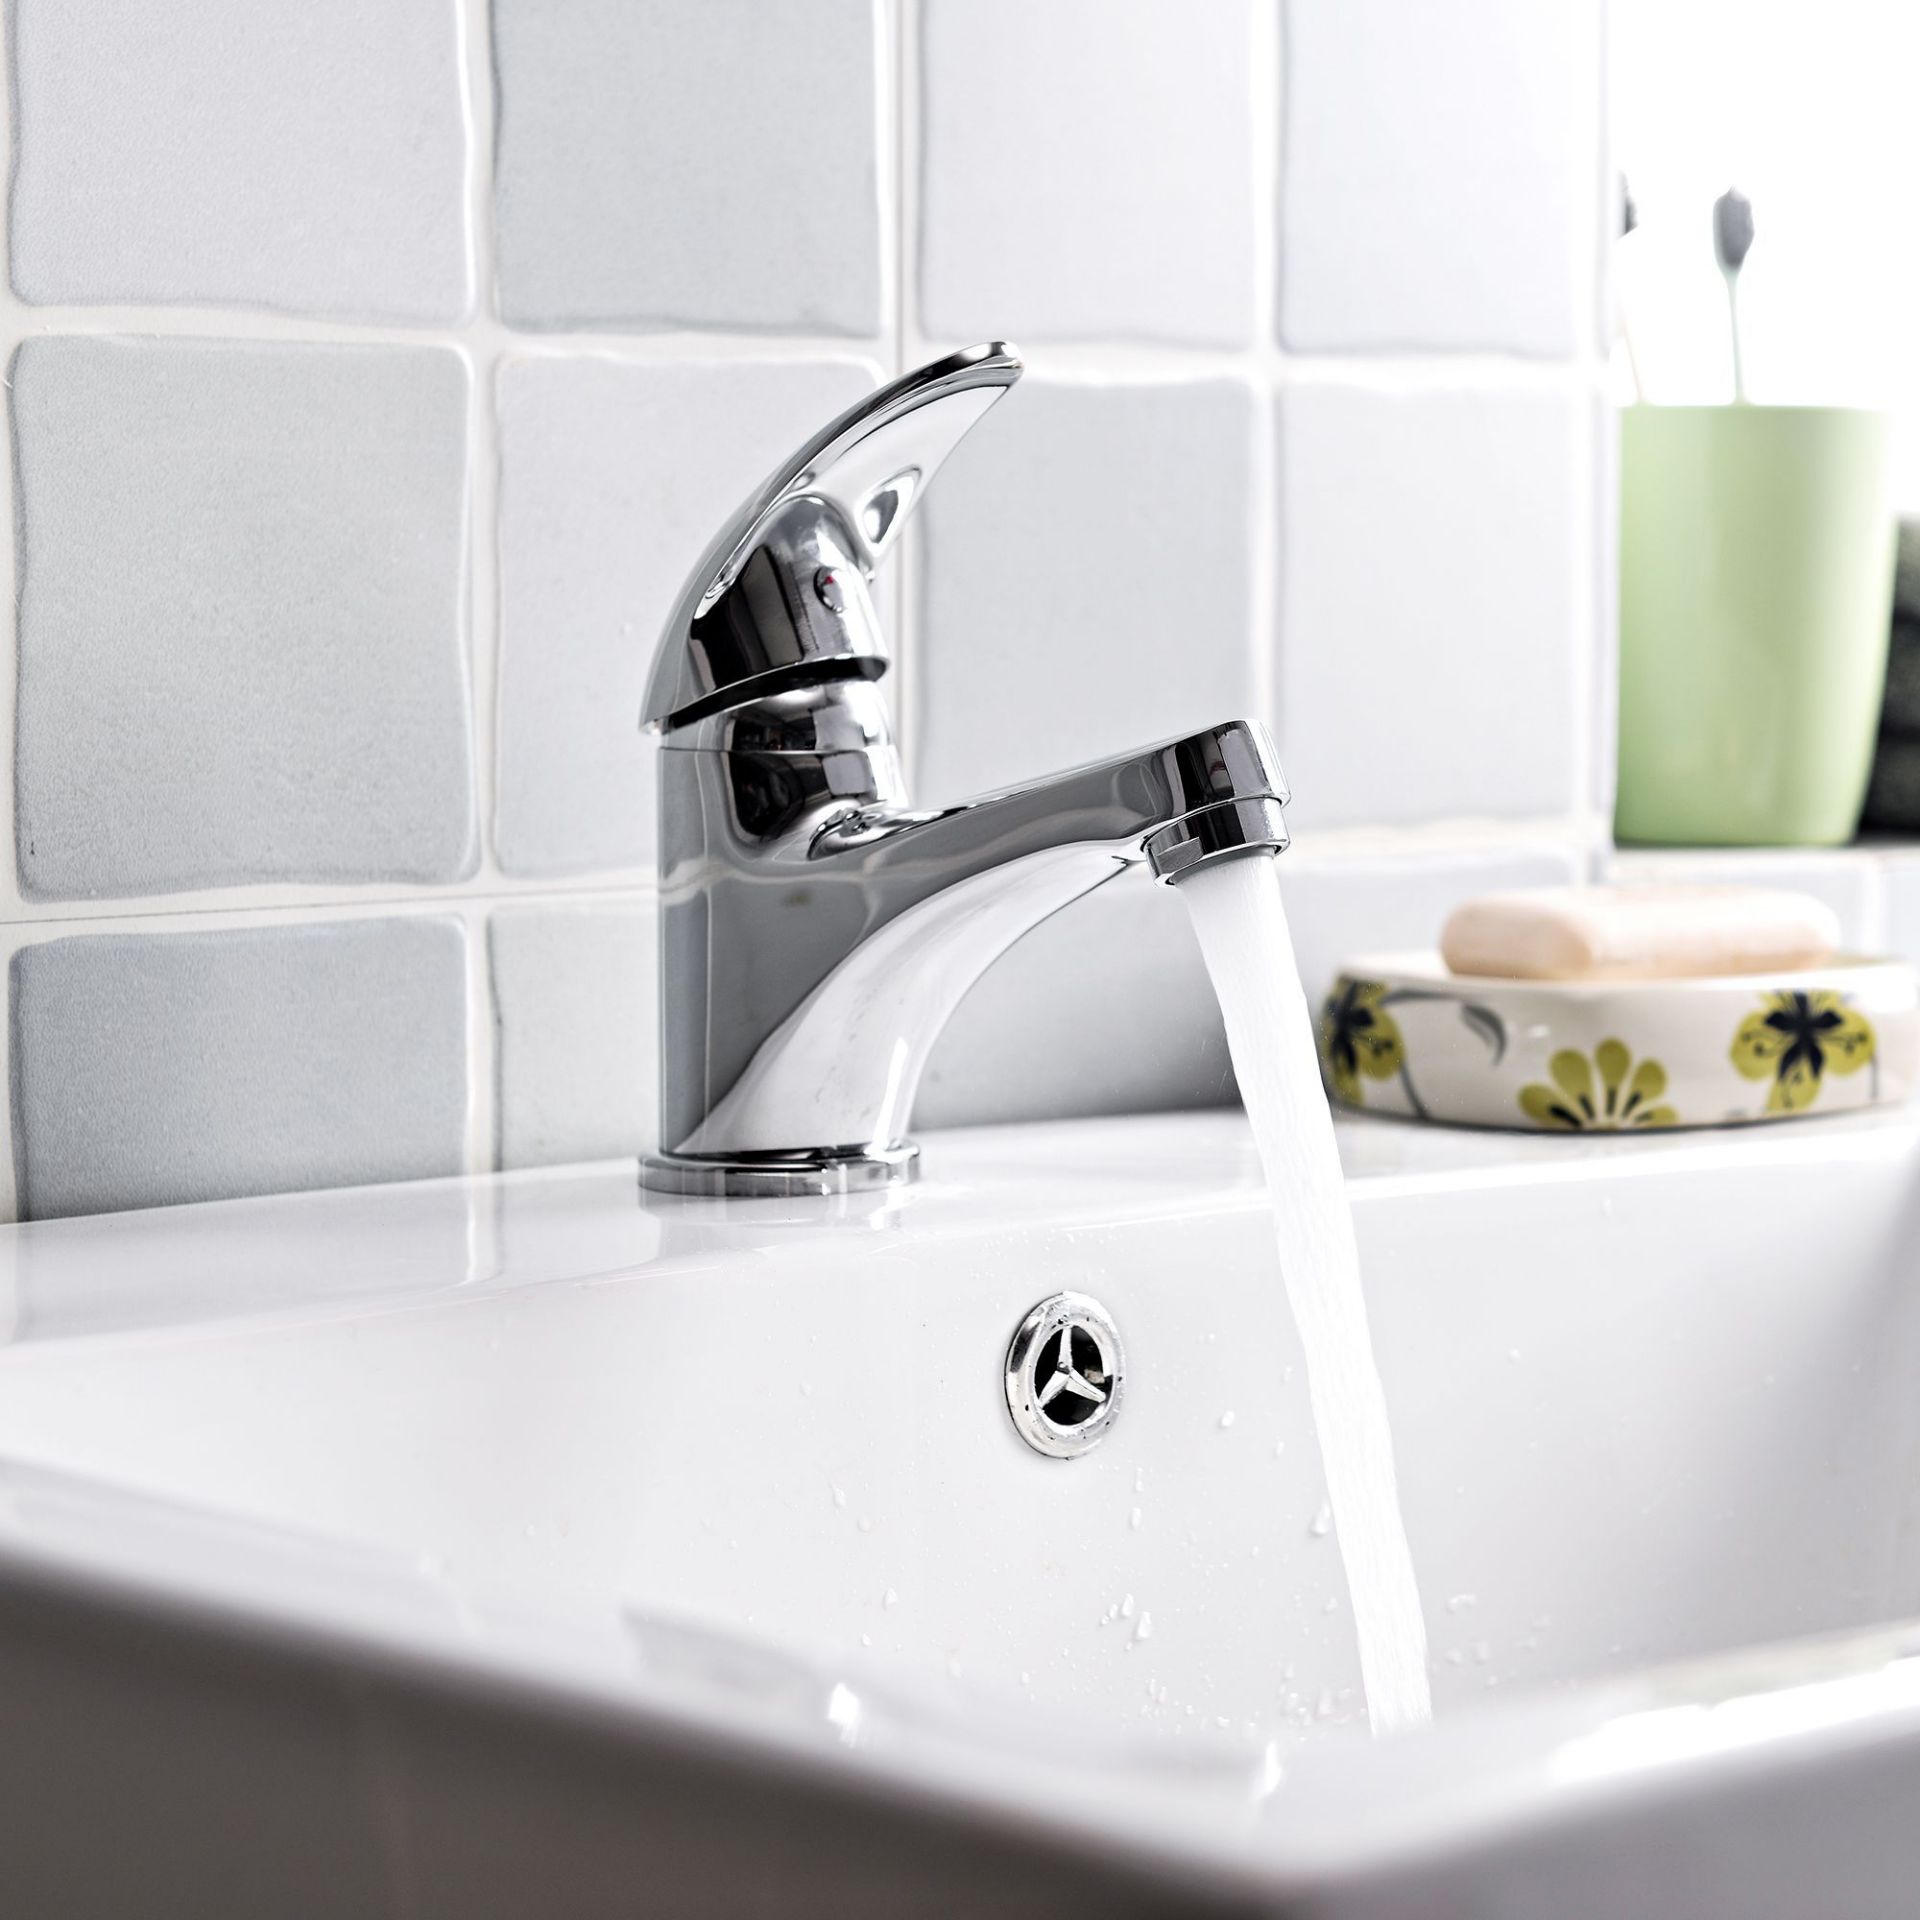 (AQ6) Eidar 1 lever Chrome-plated Contemporary Basin Mono mixer Tap. This traditional style chr... - Image 2 of 3